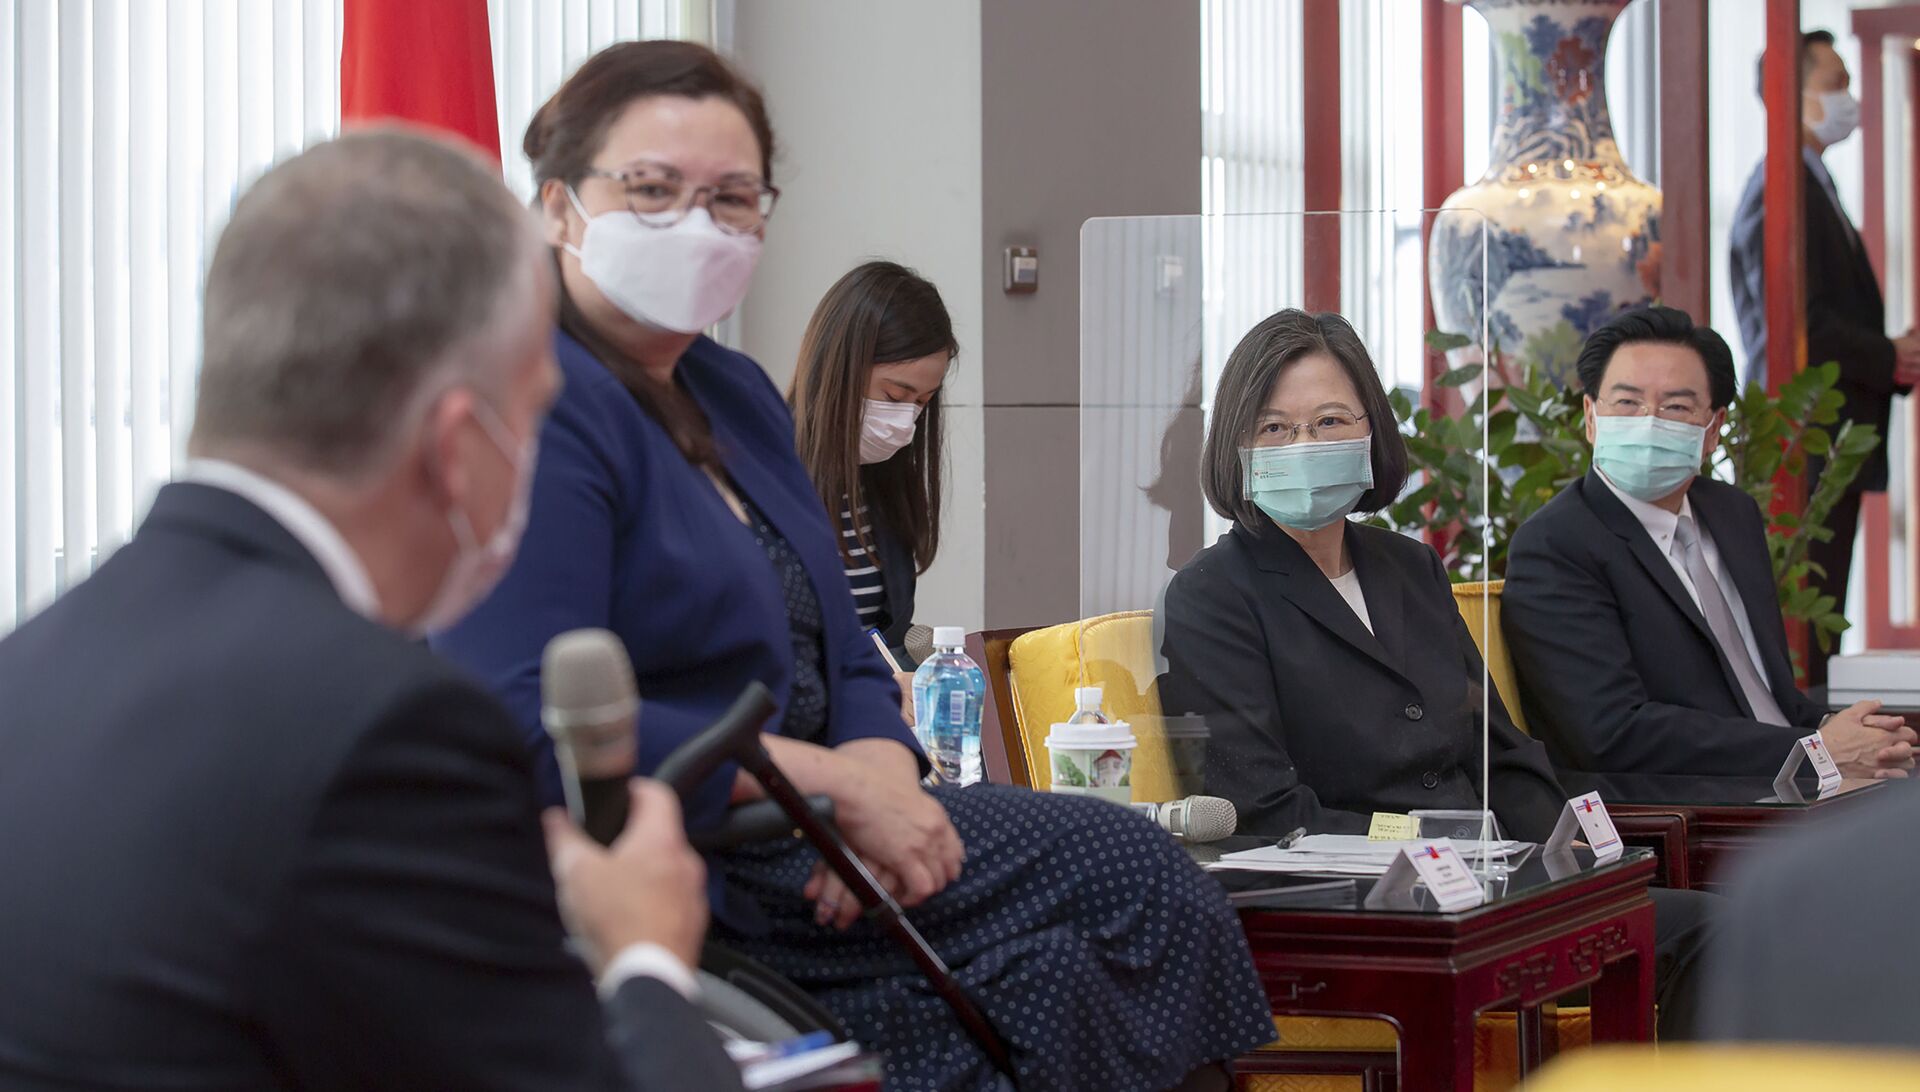 In this photo released by the Taiwan Presidential Office, President Tsai Ing-wen, second right, and Foreign Minister Joseph Wu, right, listen as U.S. Republican Sen. Dan Sullivan of Alaska at left speaks next to Democratic Sen. Tammy Duckworth of Illinois in Taipei, Taiwan, on Sunday, June 6, 2021 - Sputnik International, 1920, 09.10.2021